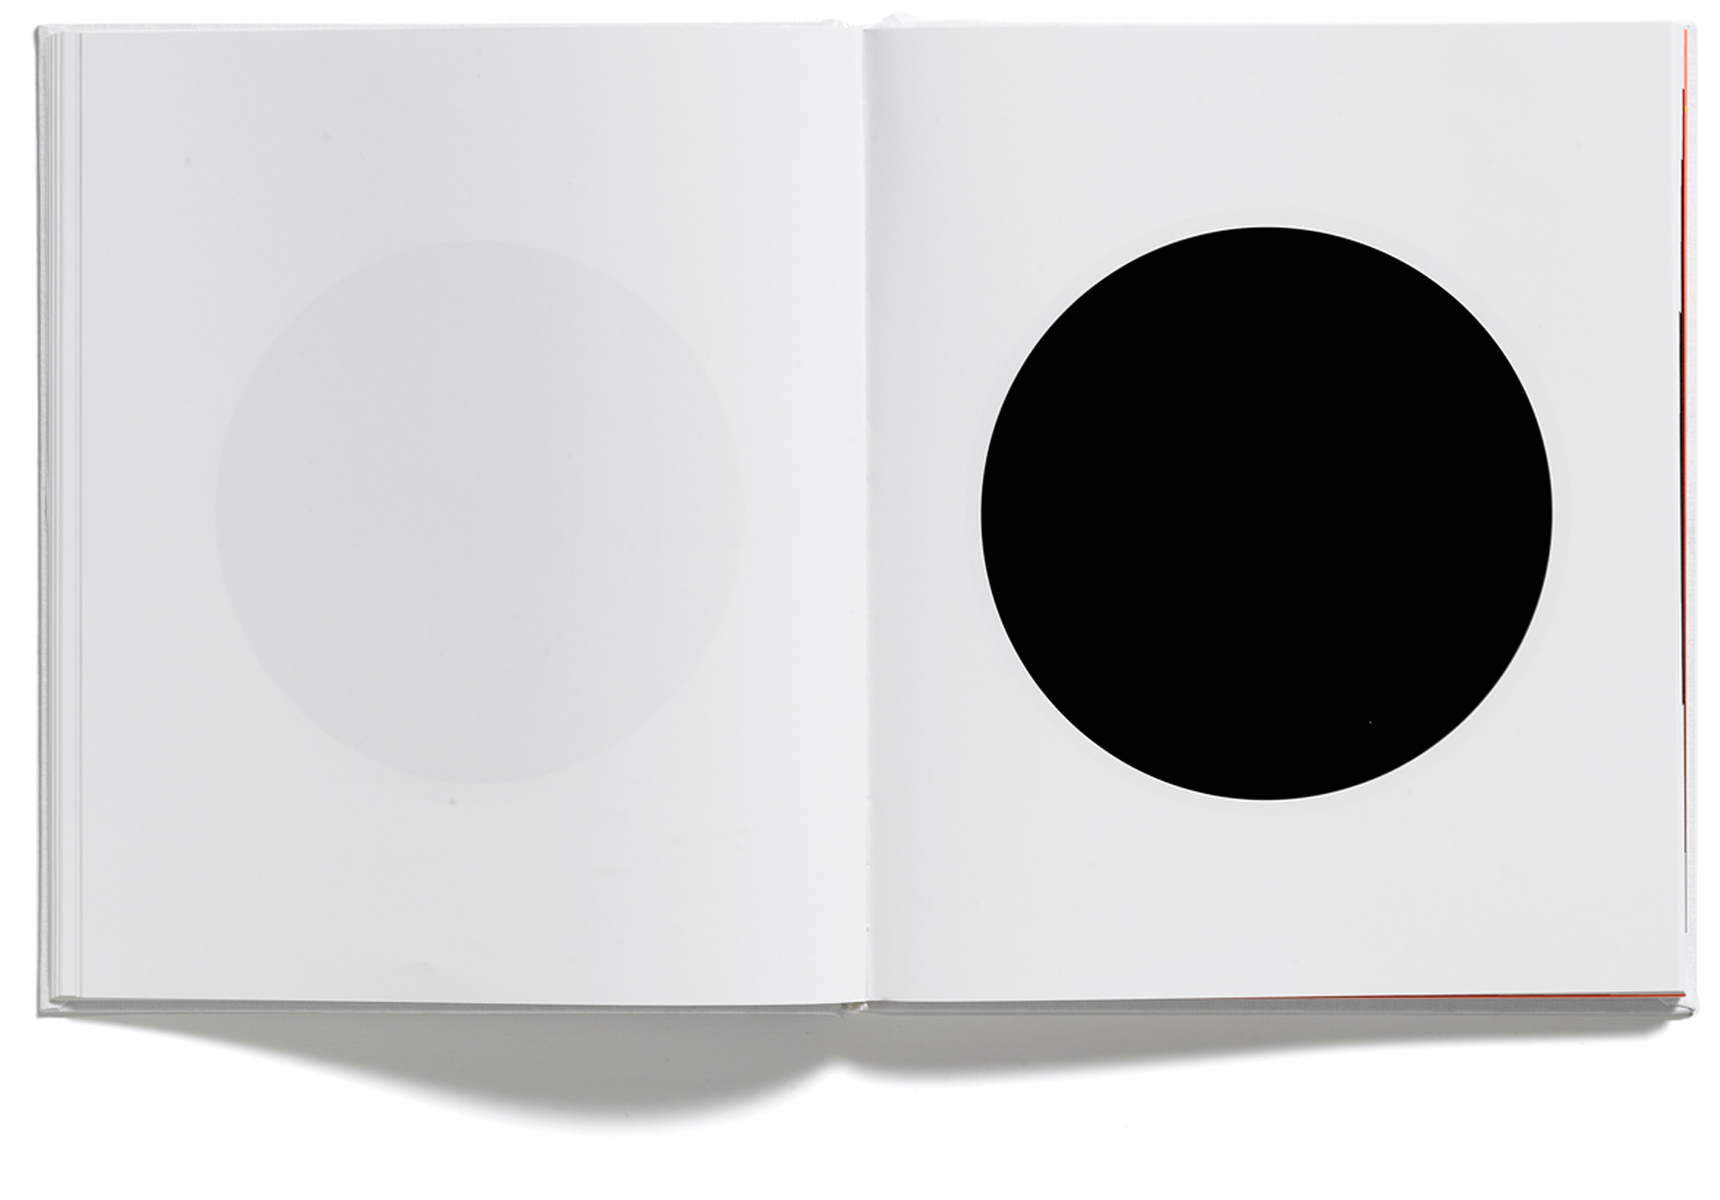 Browns Editions, Browns Editions Publishing, Browns Editions Books, Browns Editions Jonathan Ellery, Browns Editions In and Out, Browns Editions Jonathan Ellery In and Out